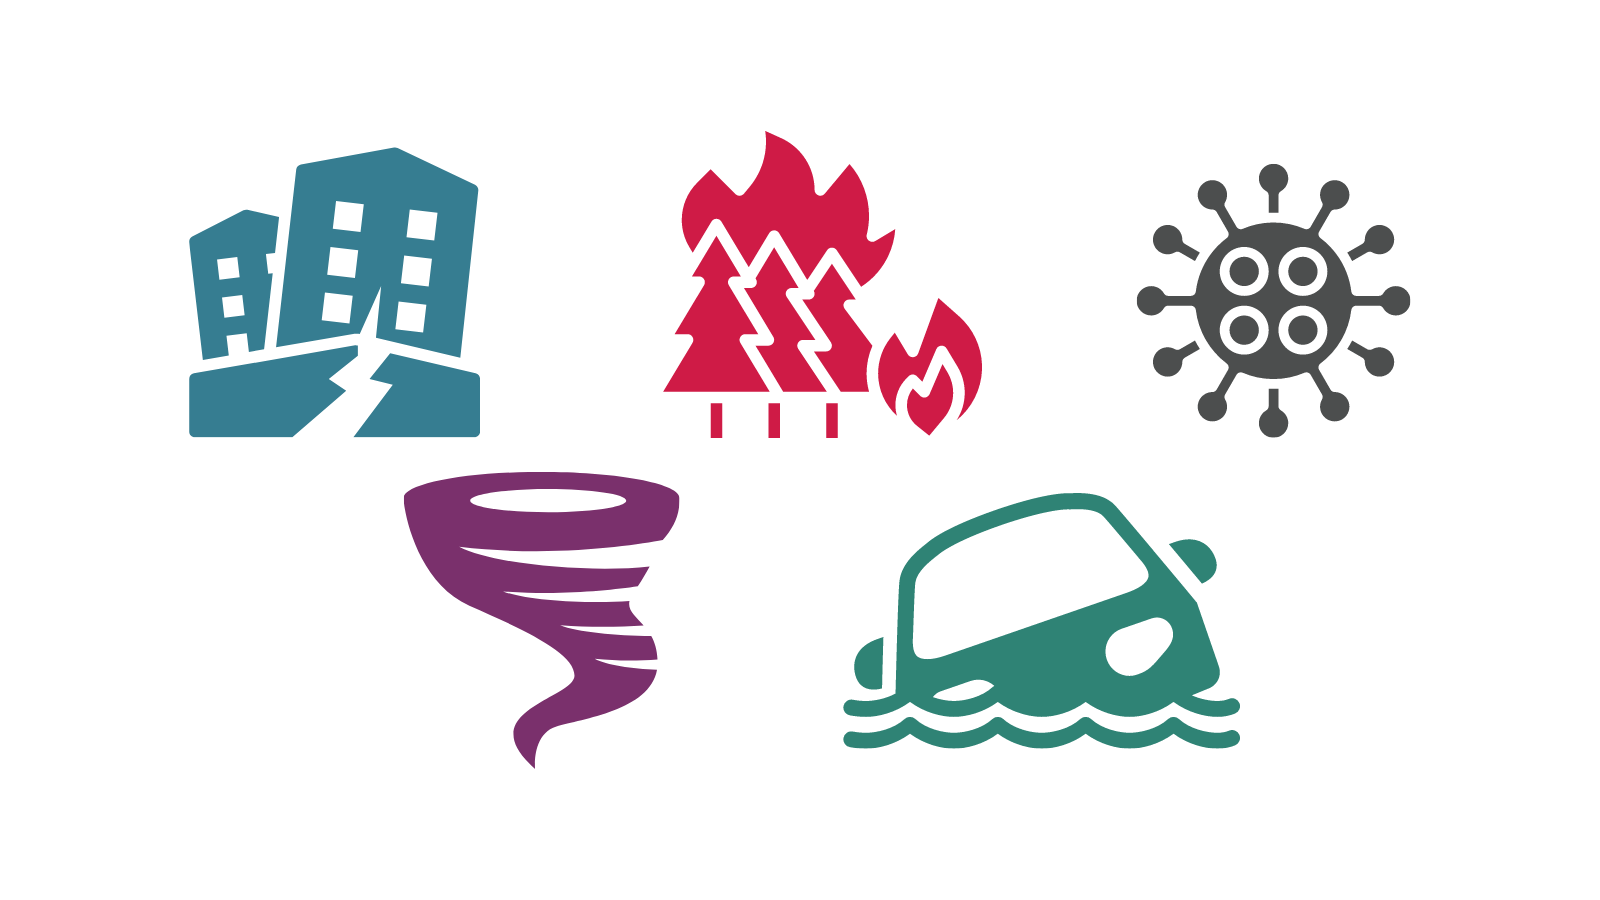 Graphics representing earthquakes, bushfires, COVID-19, cyclones and floods.